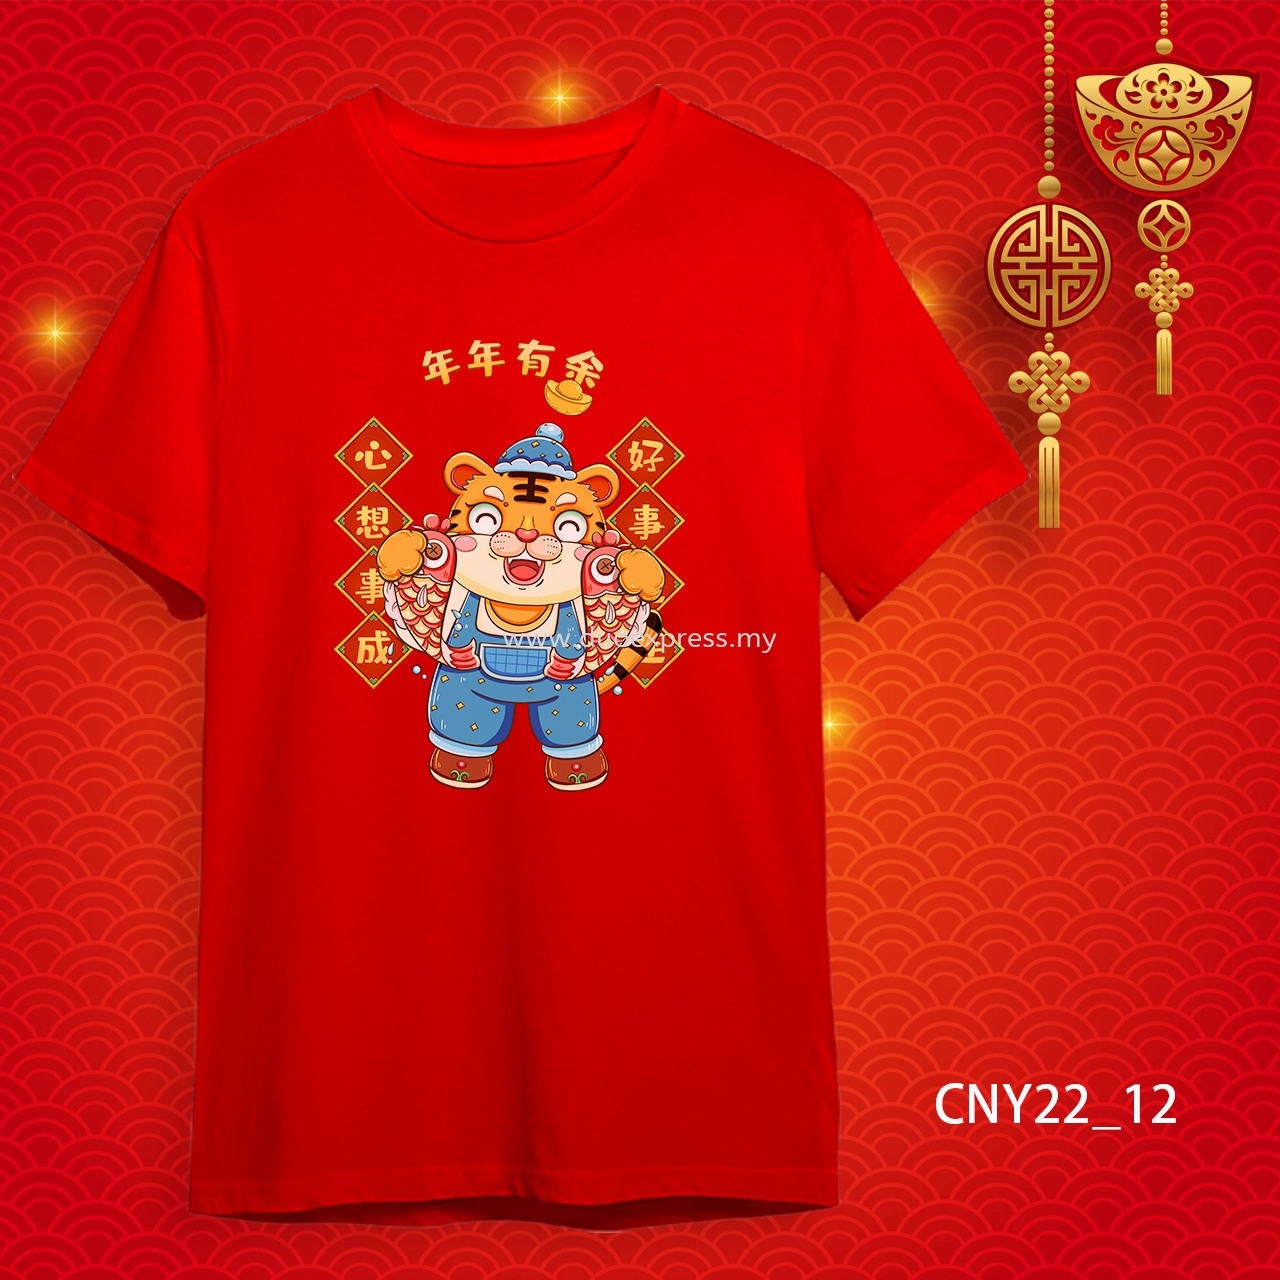 {READY STOCK} 2022 虎年家庭T恤 新年T恤 CNY 2022 Year Of The Tiger Family T-Shirts. Adults and Kids.